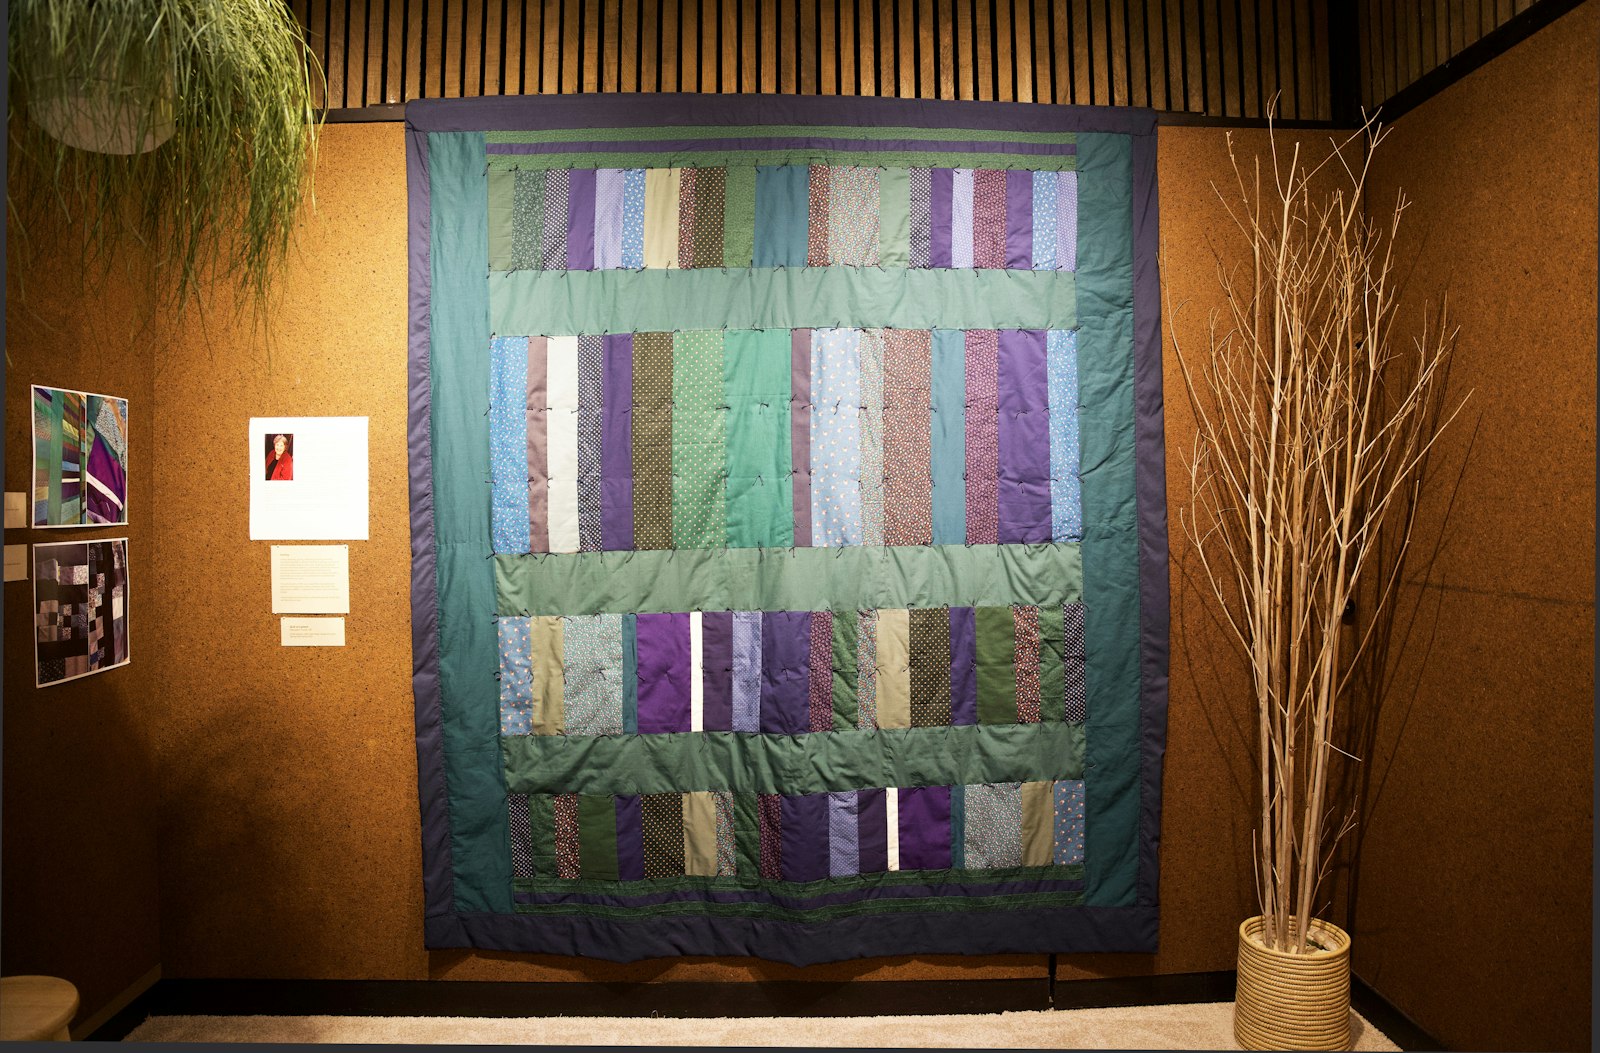 Through quilting, Sr. Turner said, she was able to take the diversity of colors and shapes to create a new unity.